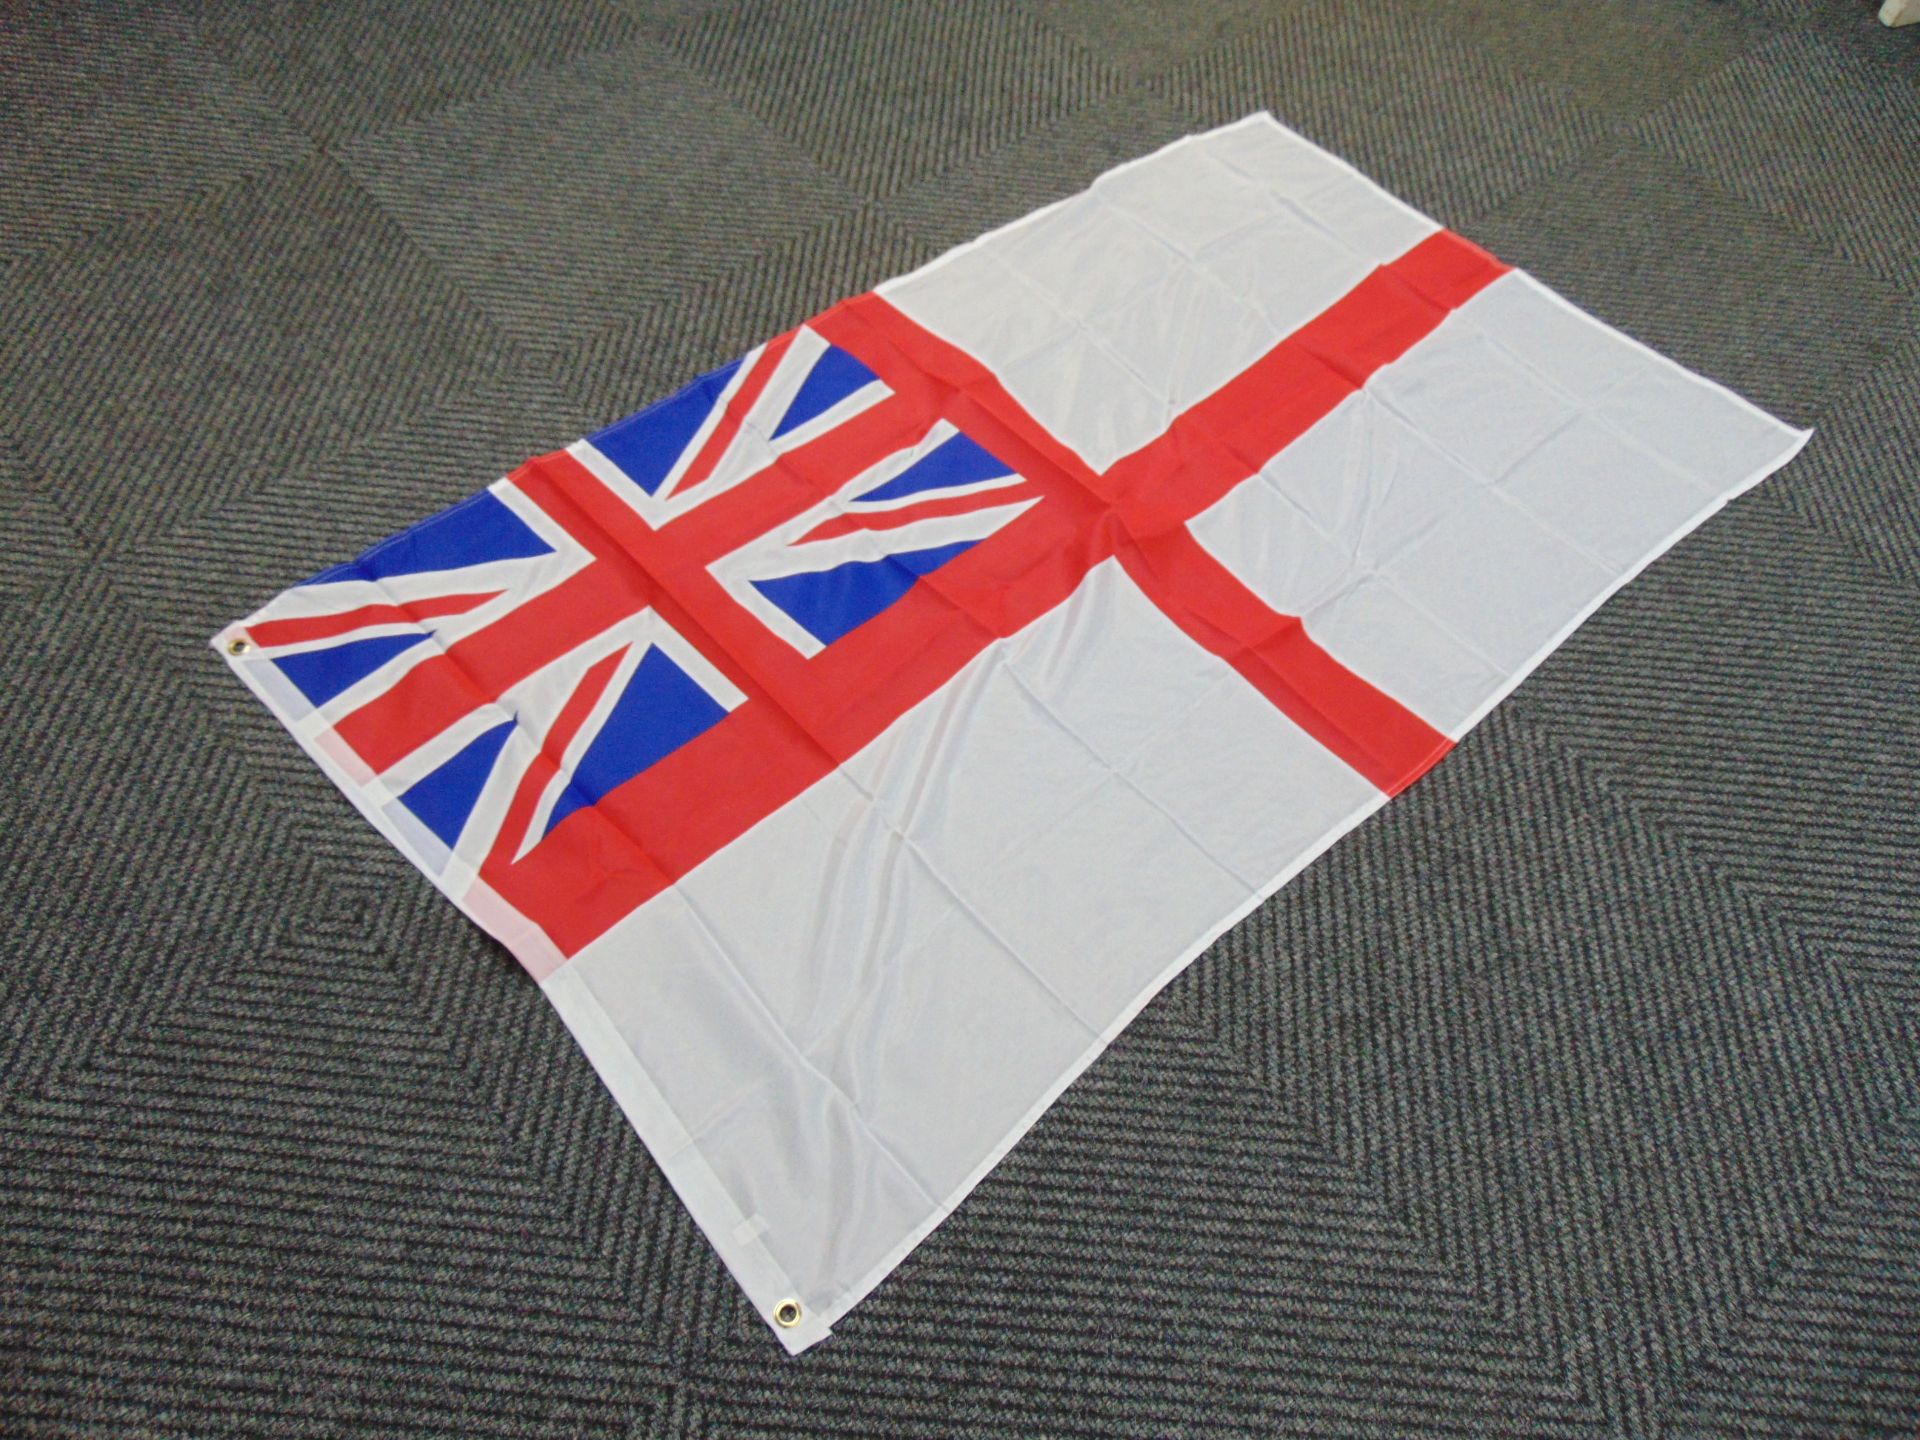 White Ensign Flag - 5ft x 3ft with Metal Eyelets. - Image 4 of 4